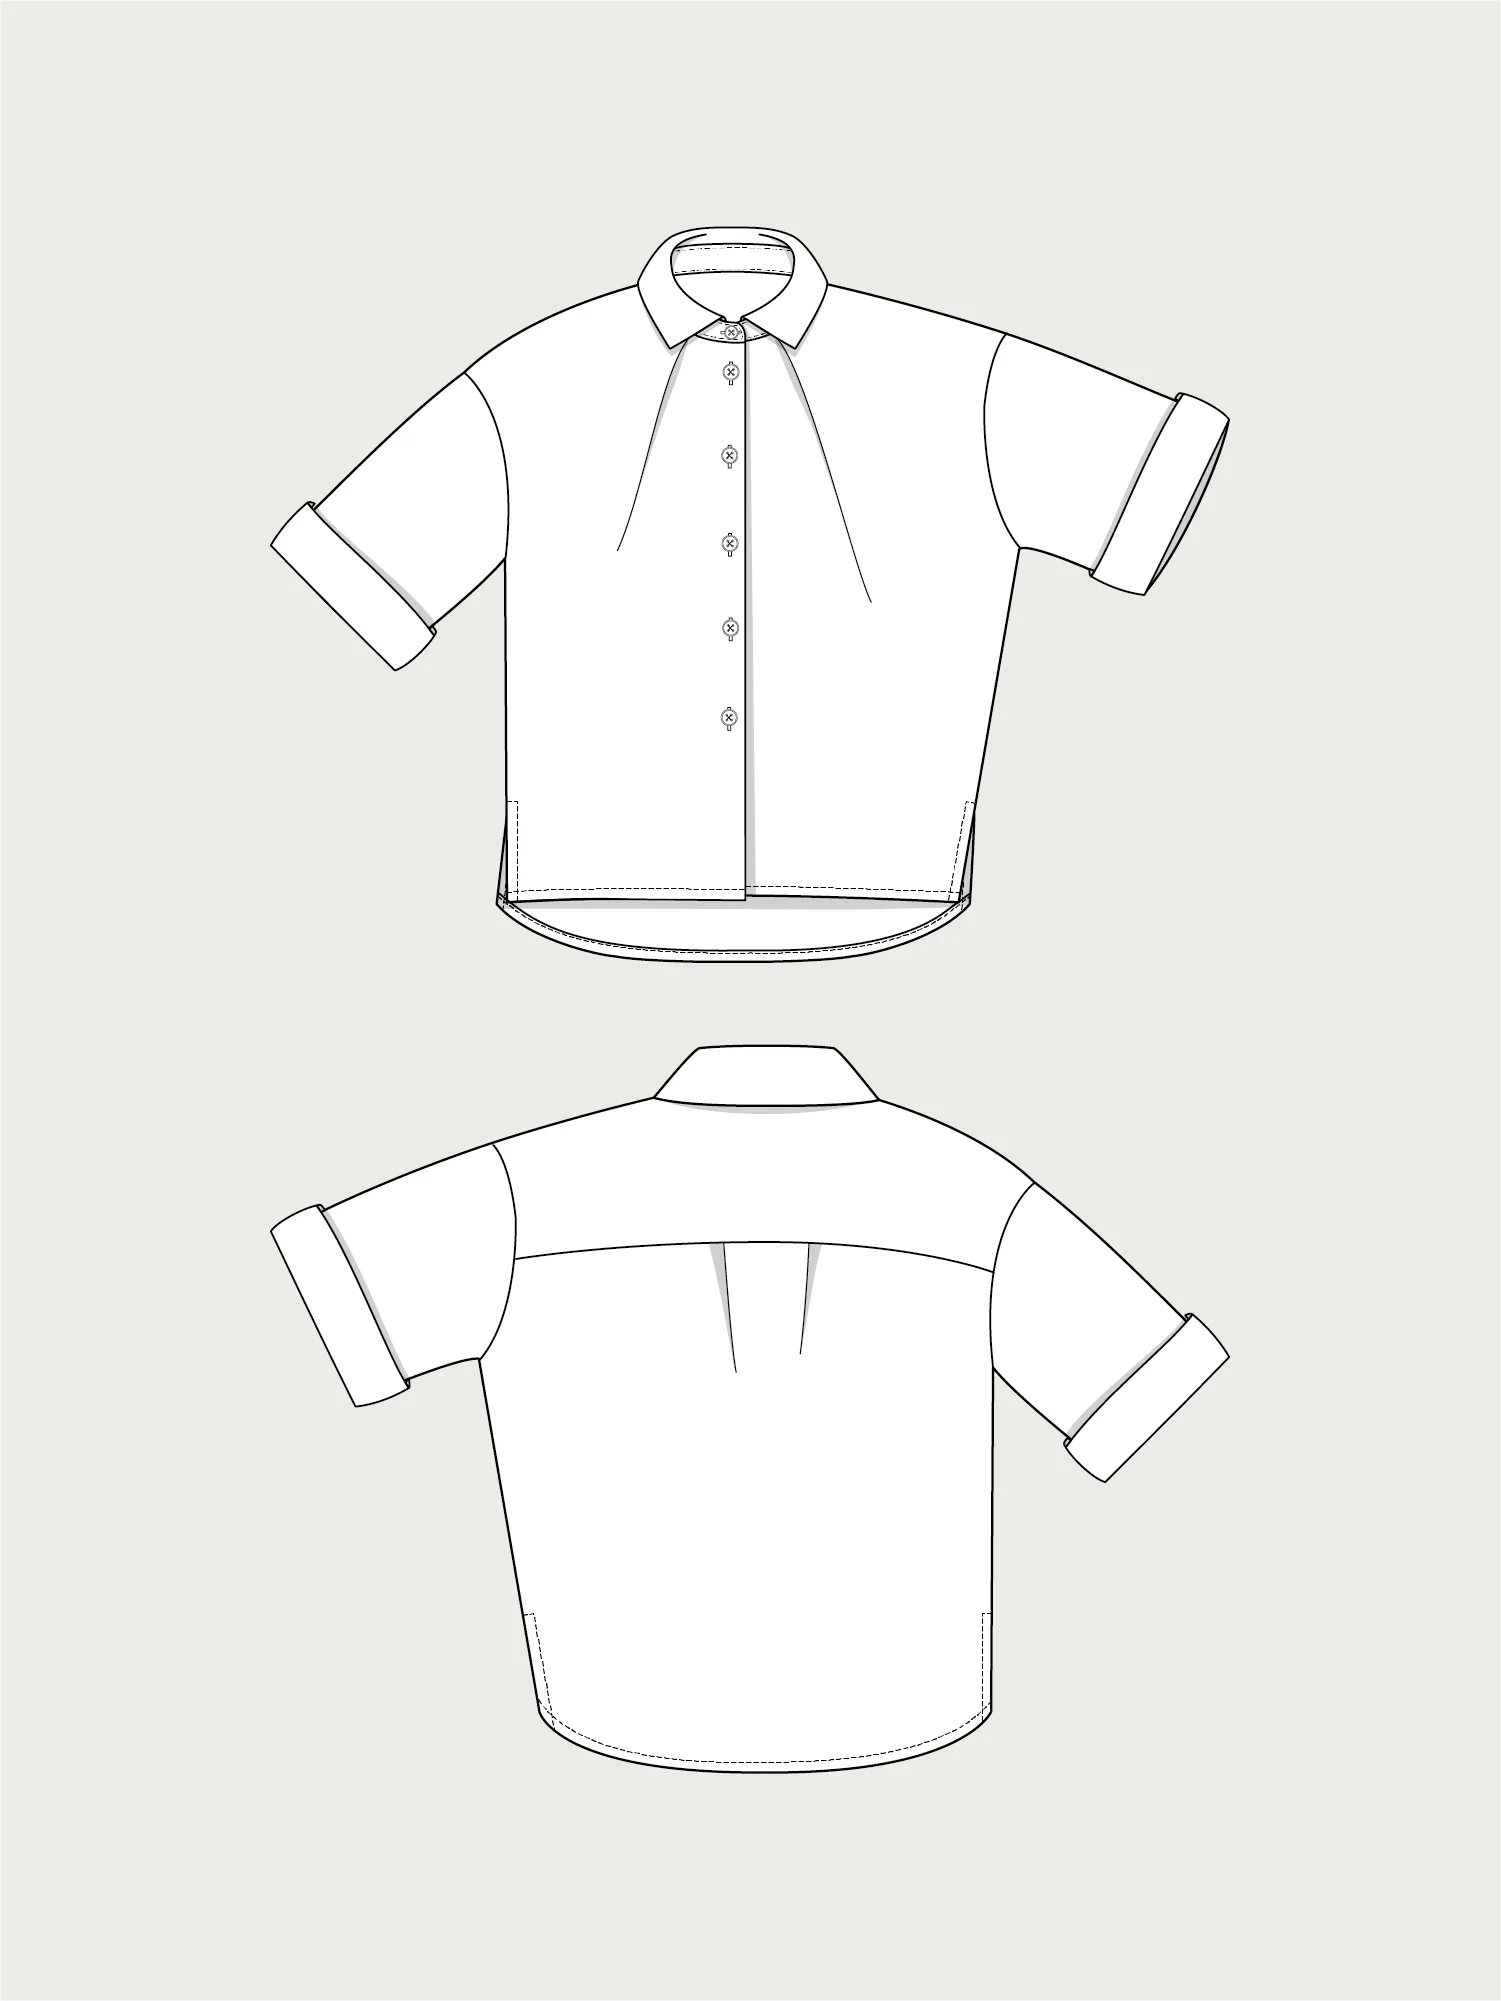 Front Pleat Shirt sewing pattern by The Assembly Line